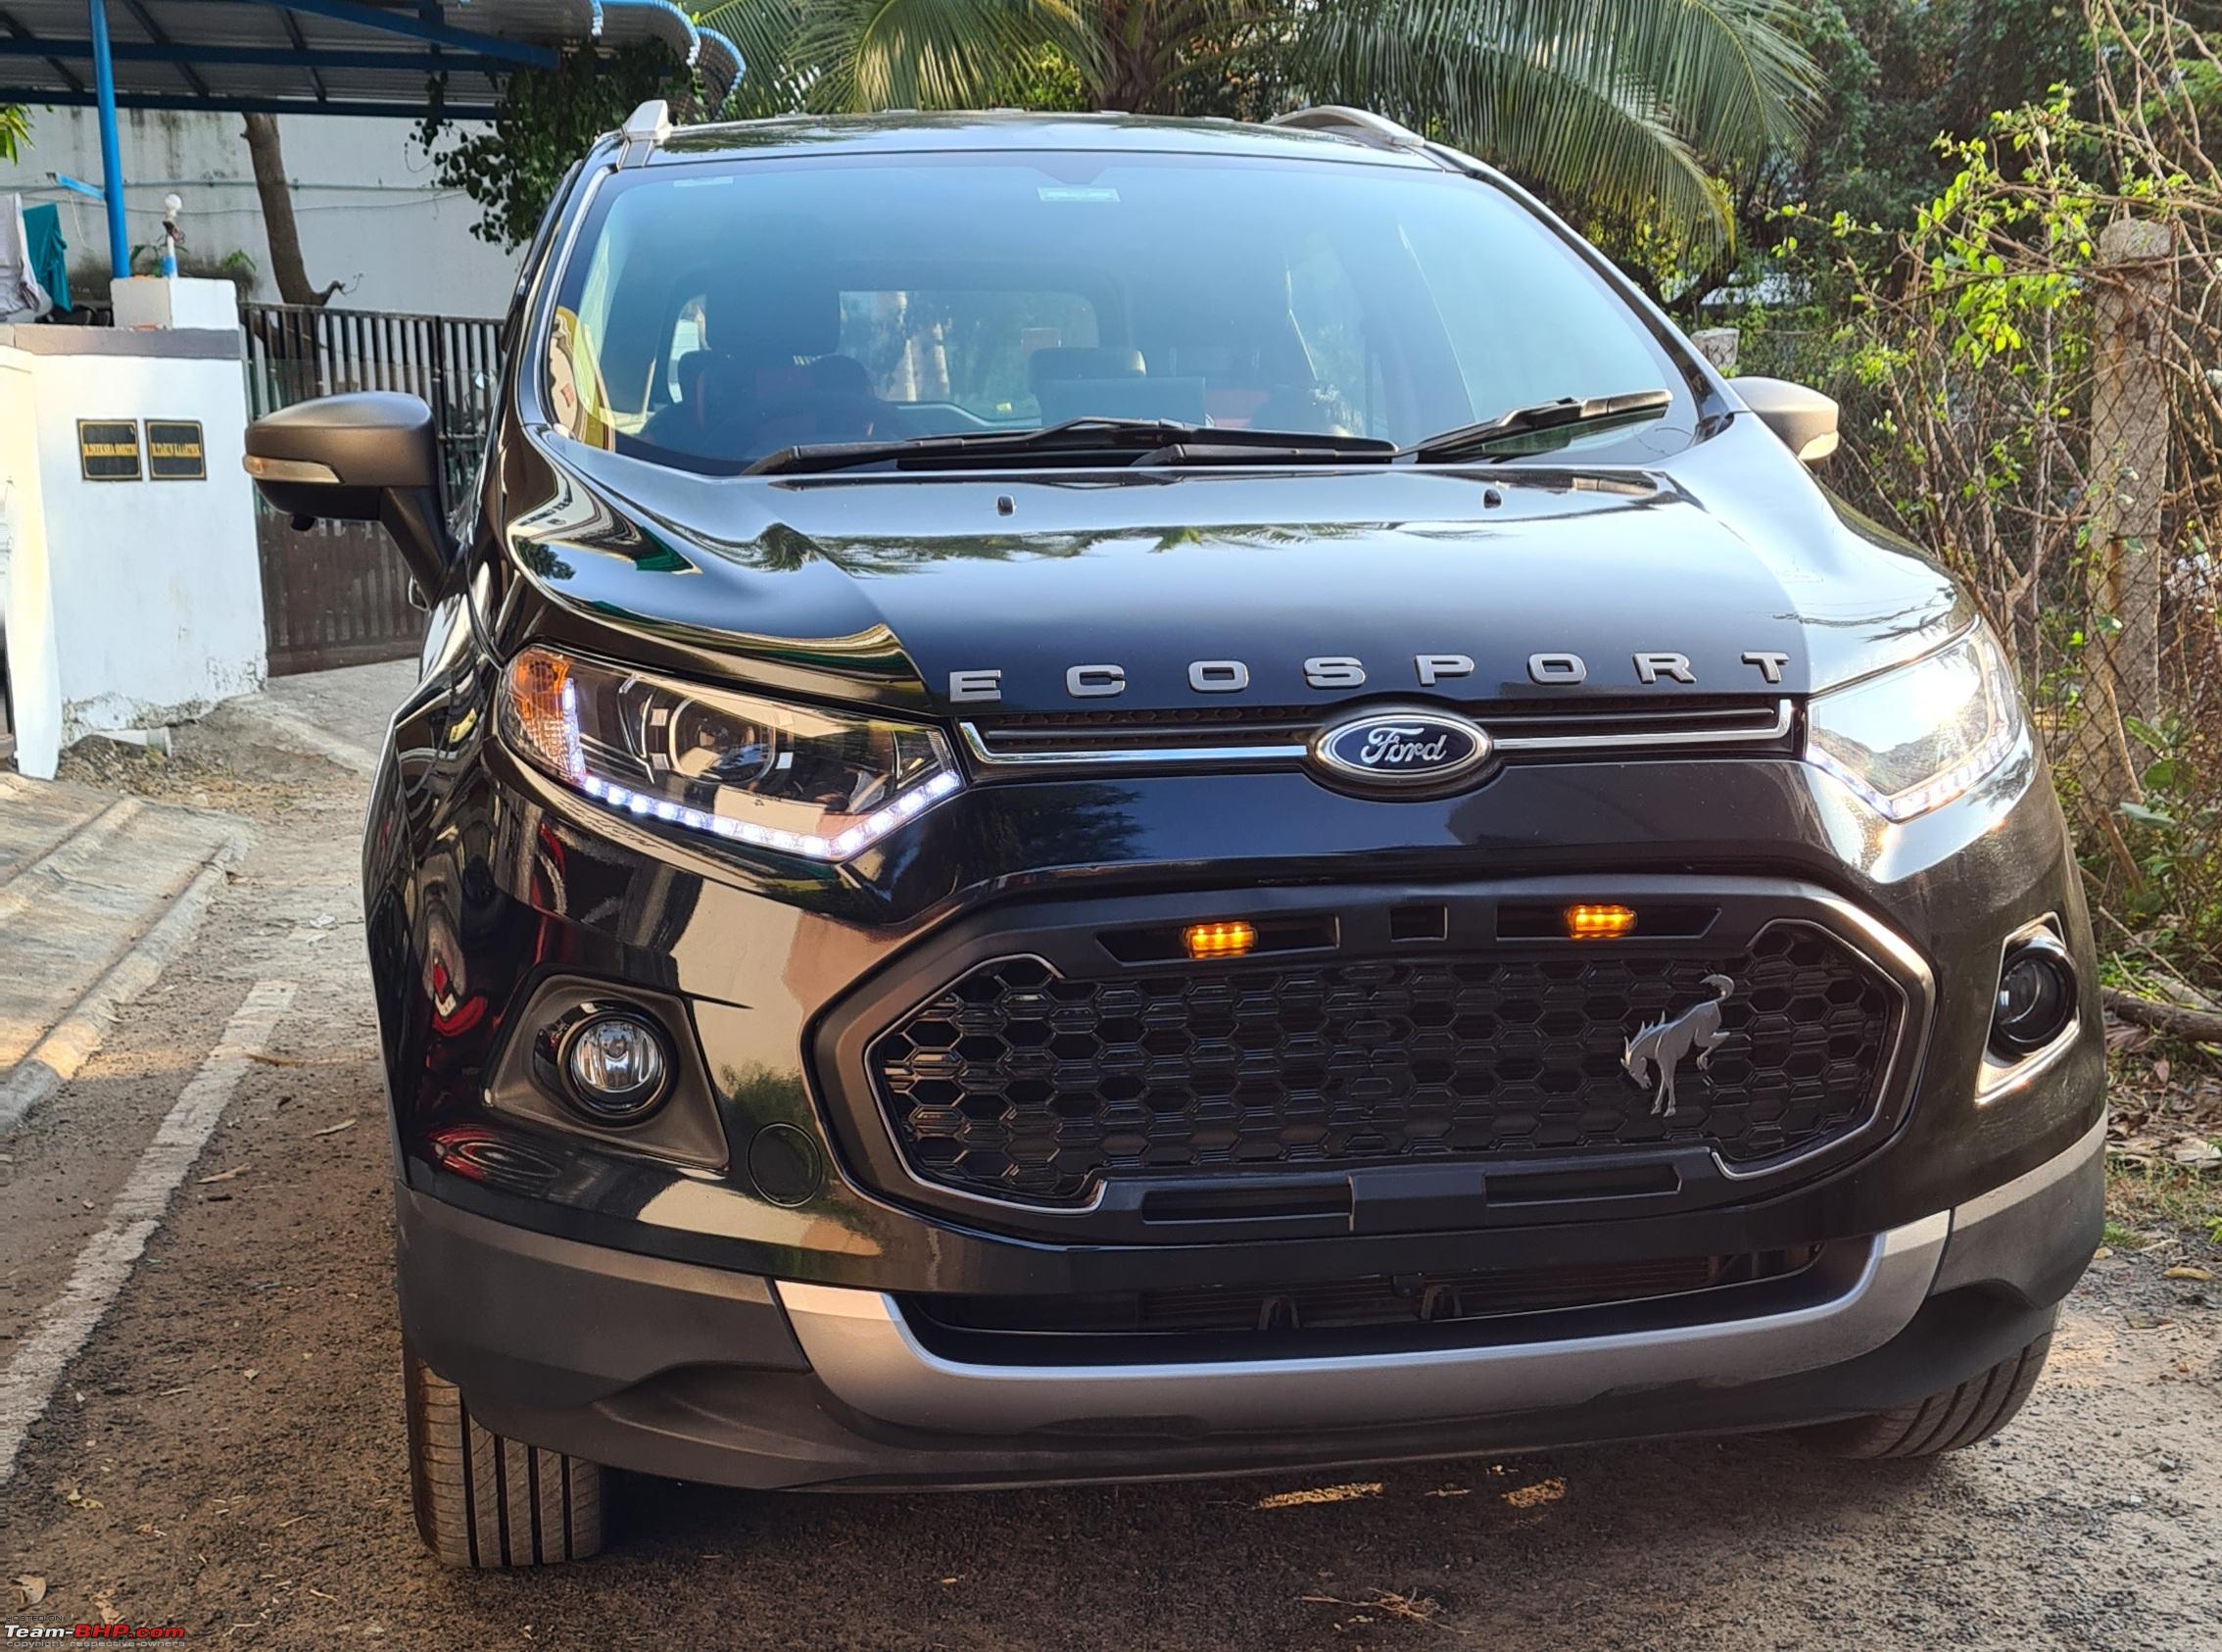 Meet the Puma, Ford's replacement for EcoSport